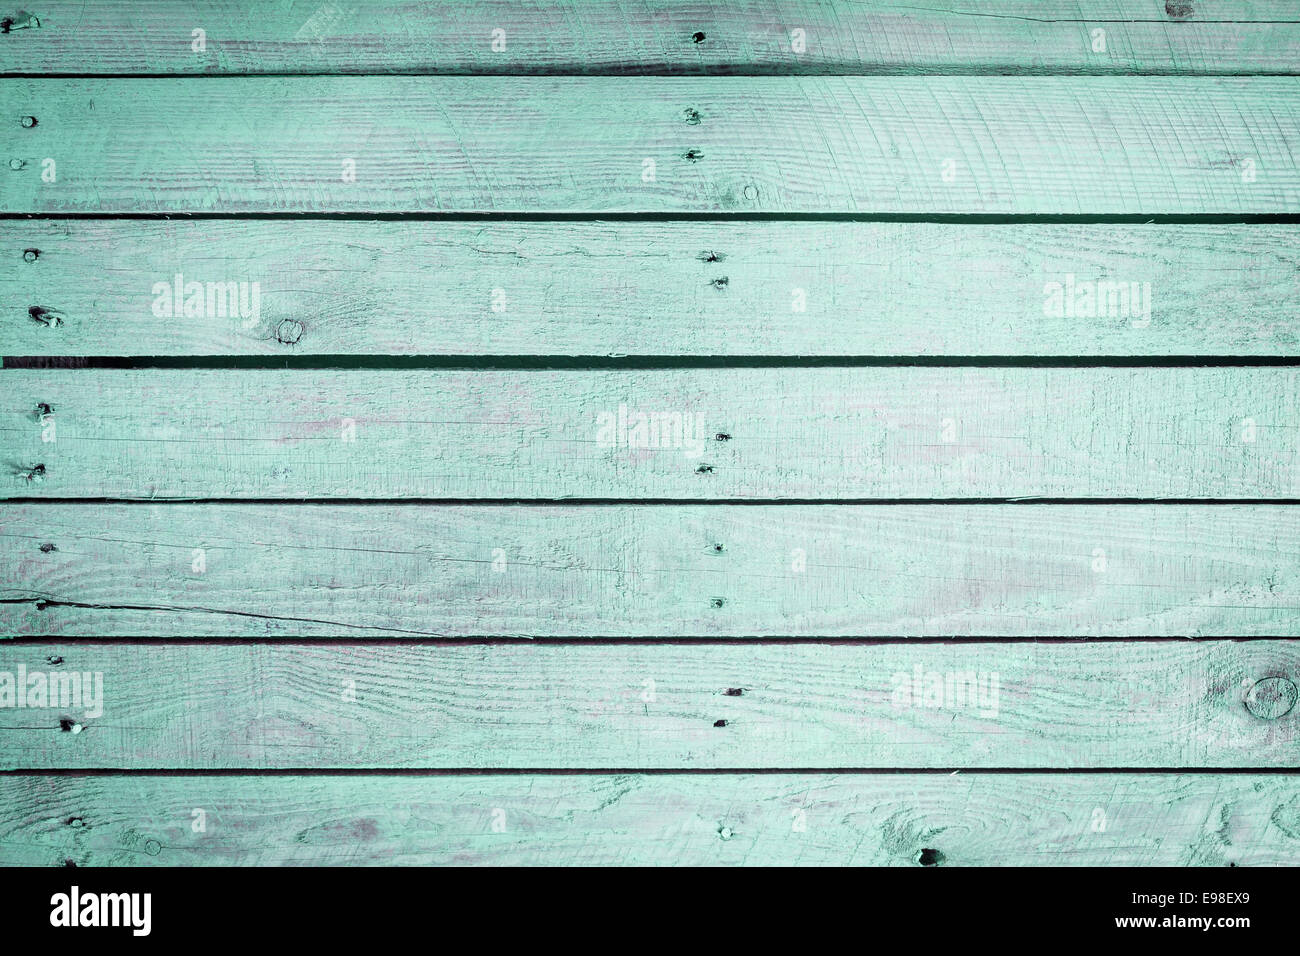 Aquamarine wooden background texture with faded parallel vintage wood planks with two haphazard rows of small nails in the 2014 Stock Photo